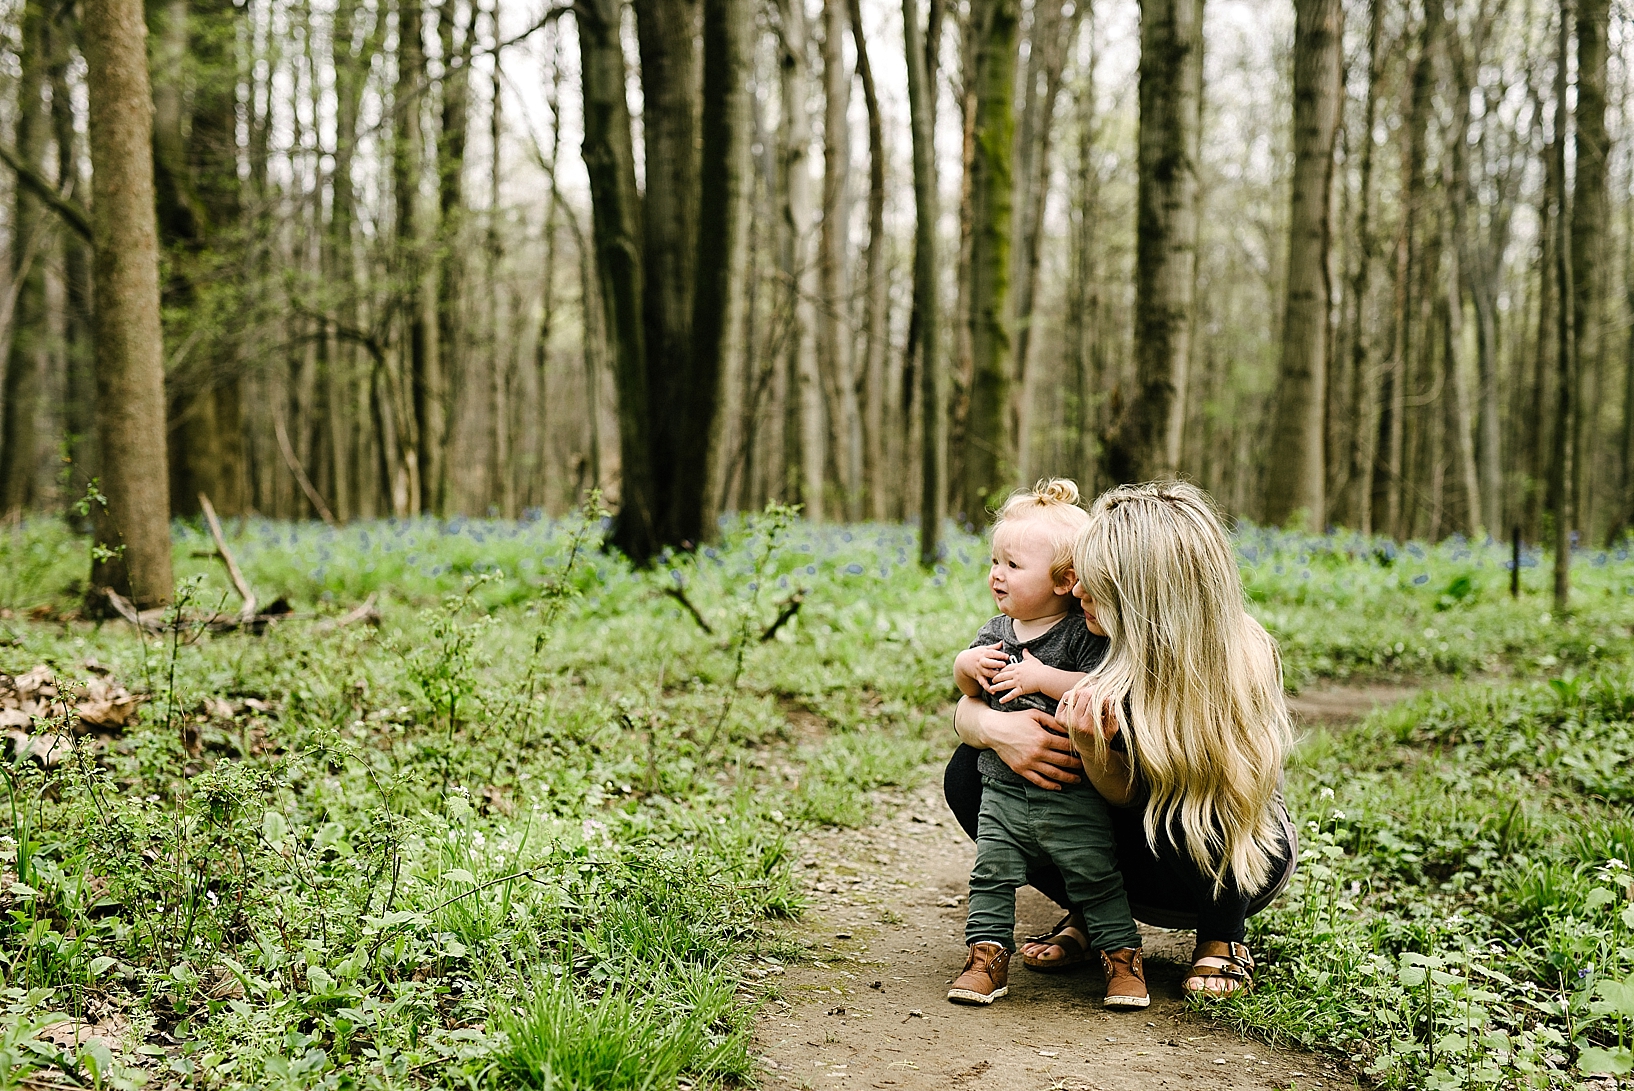 woman with long wavy blonde hair kneeling by son in woods along trail of bluebells